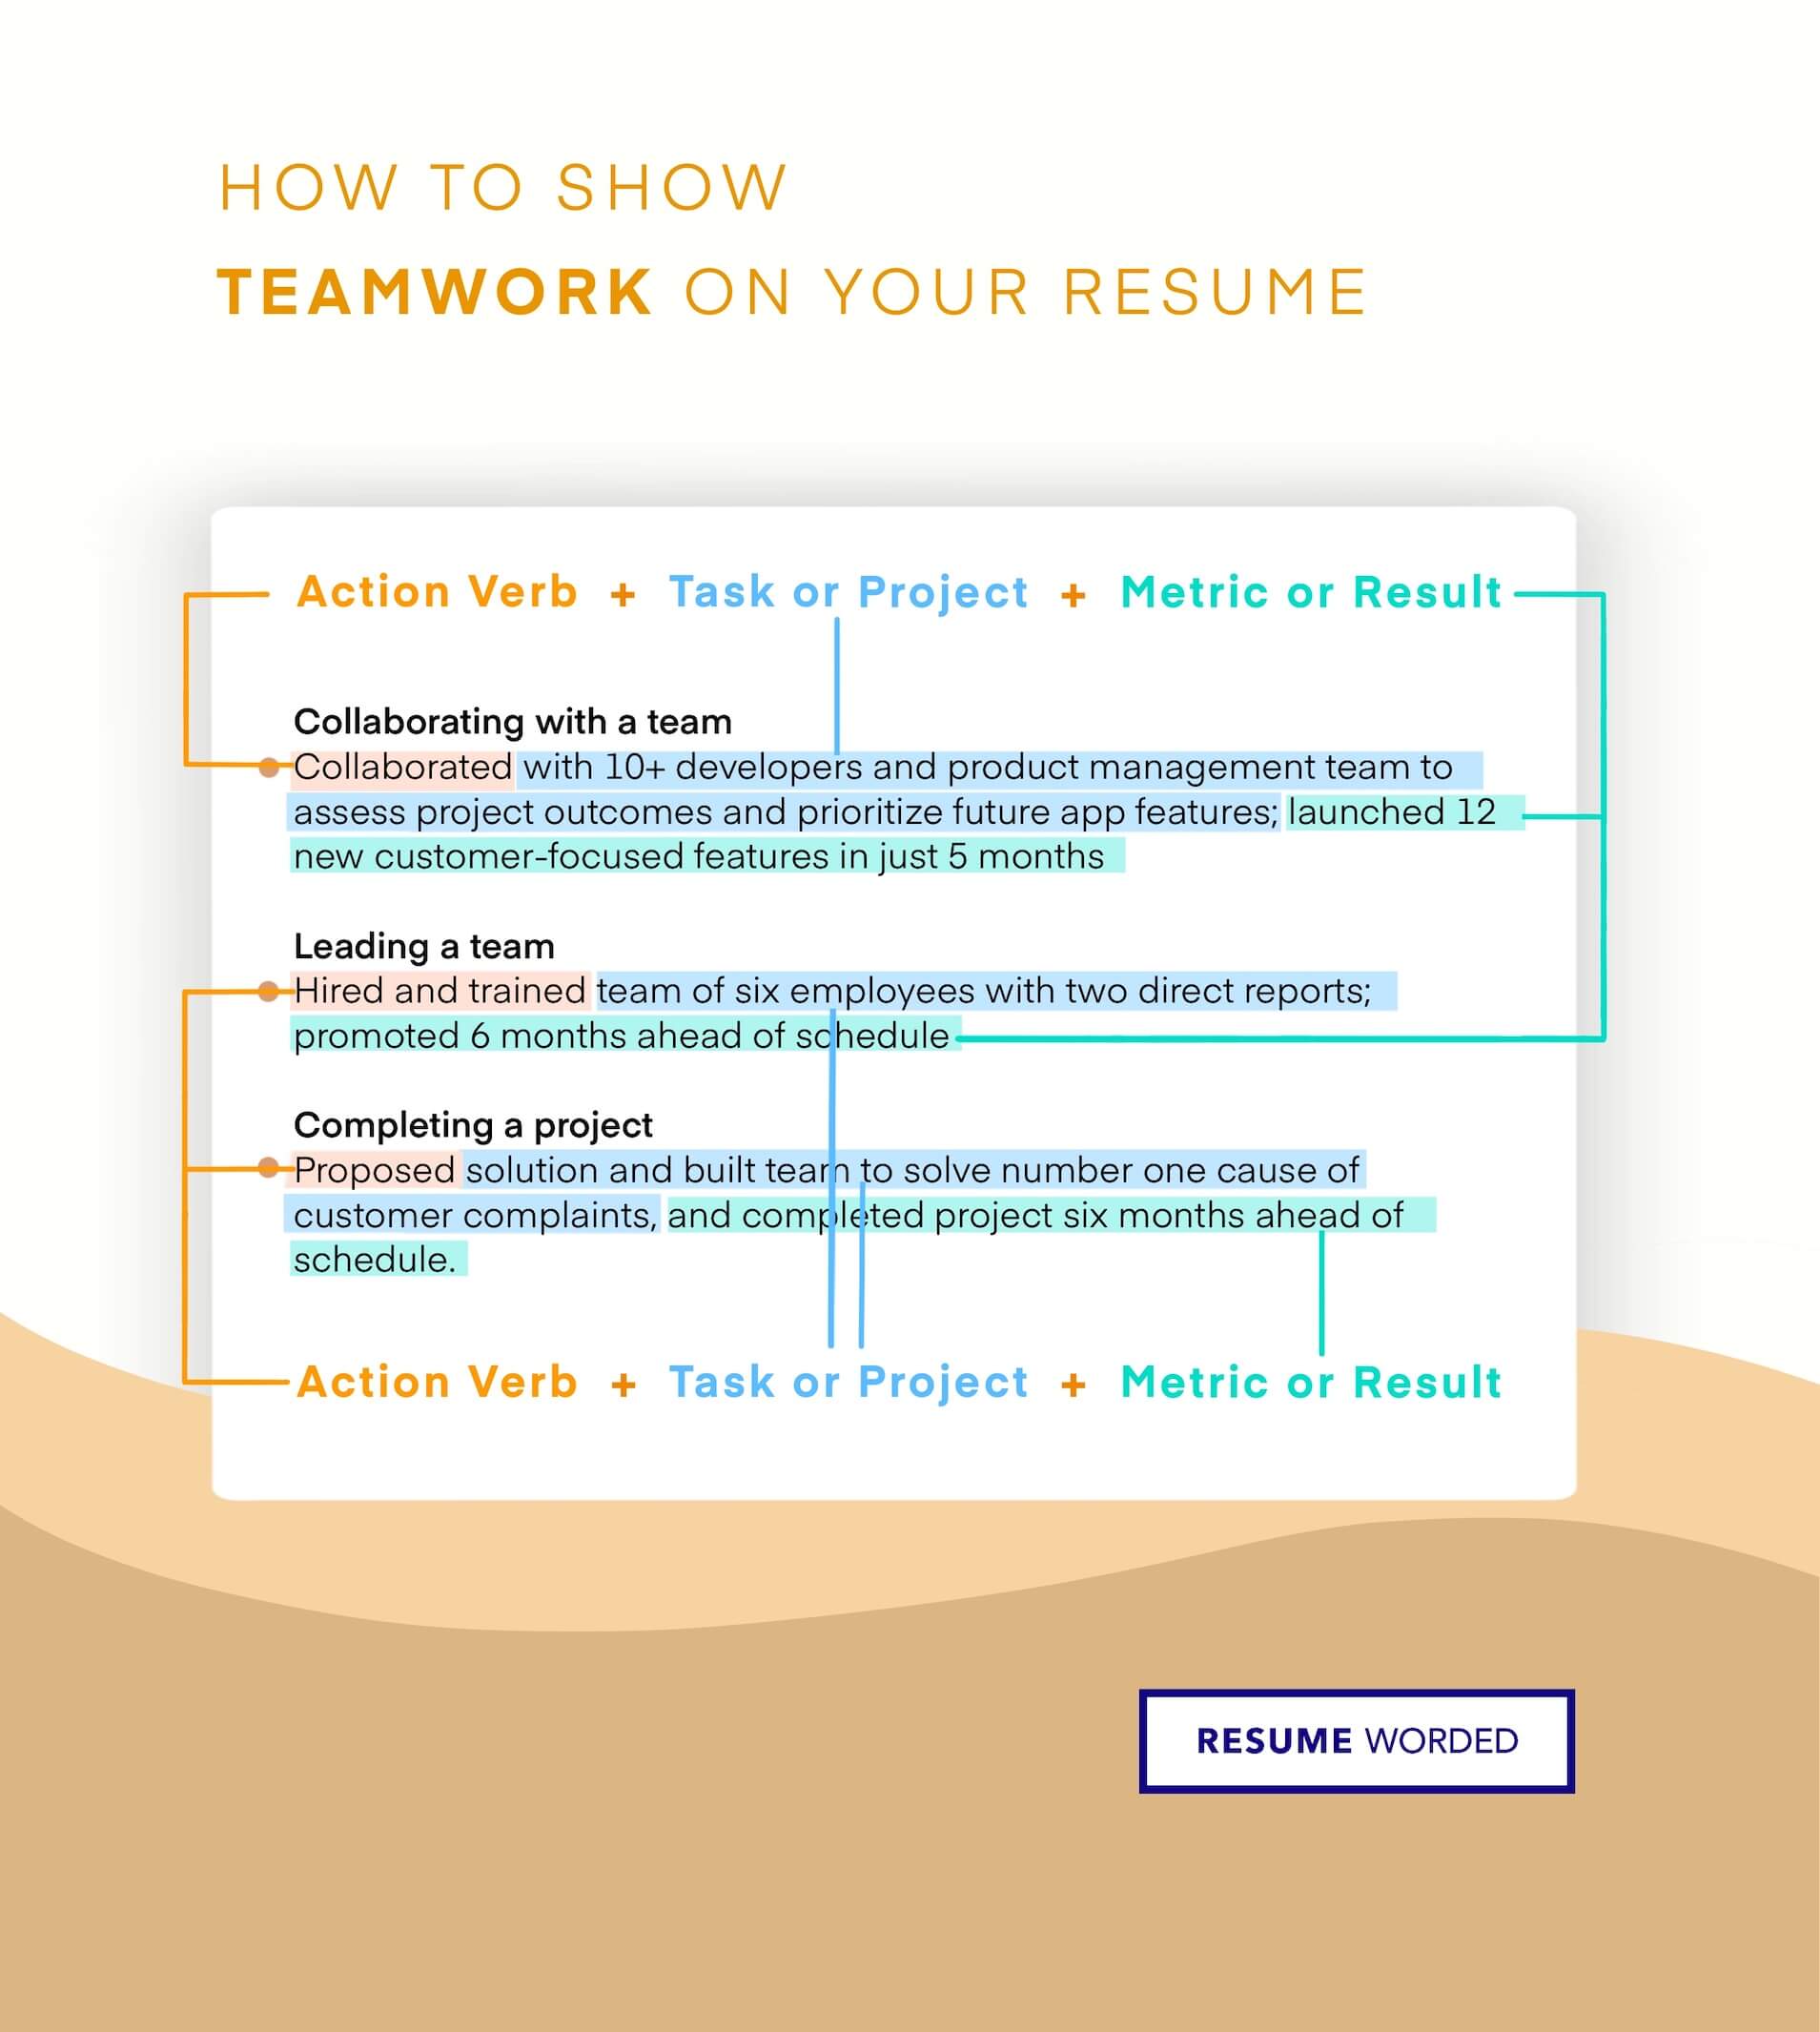 How to show teamwork on a resume, an infographic